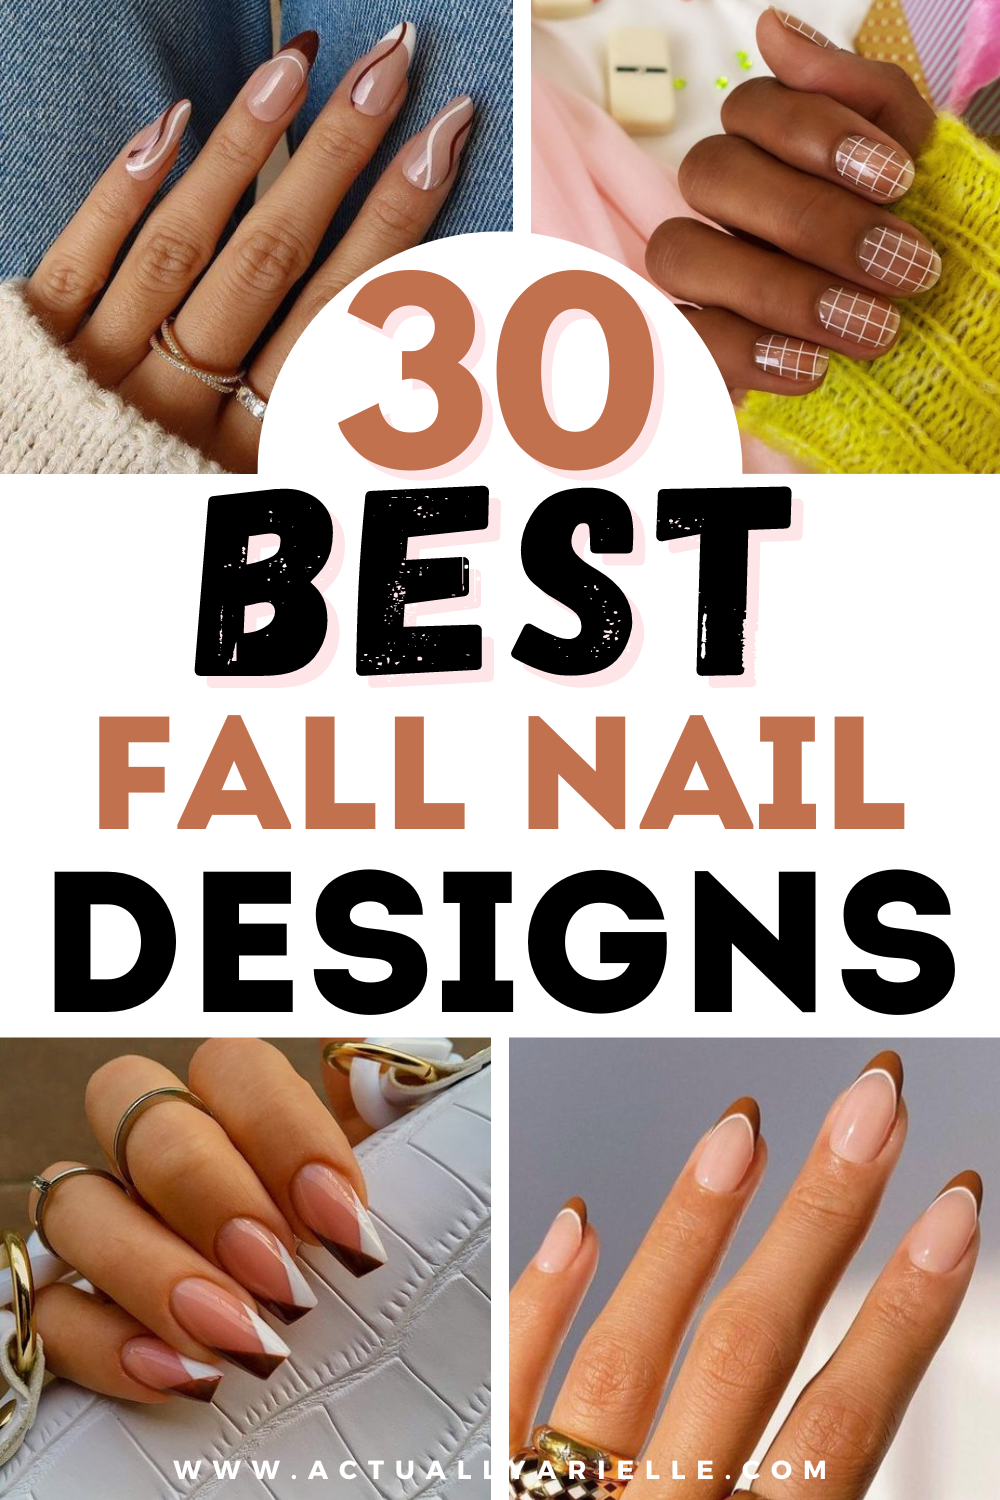 45 Best Fall Nail Ideas 2021 : Caramel latte tip nails for fall